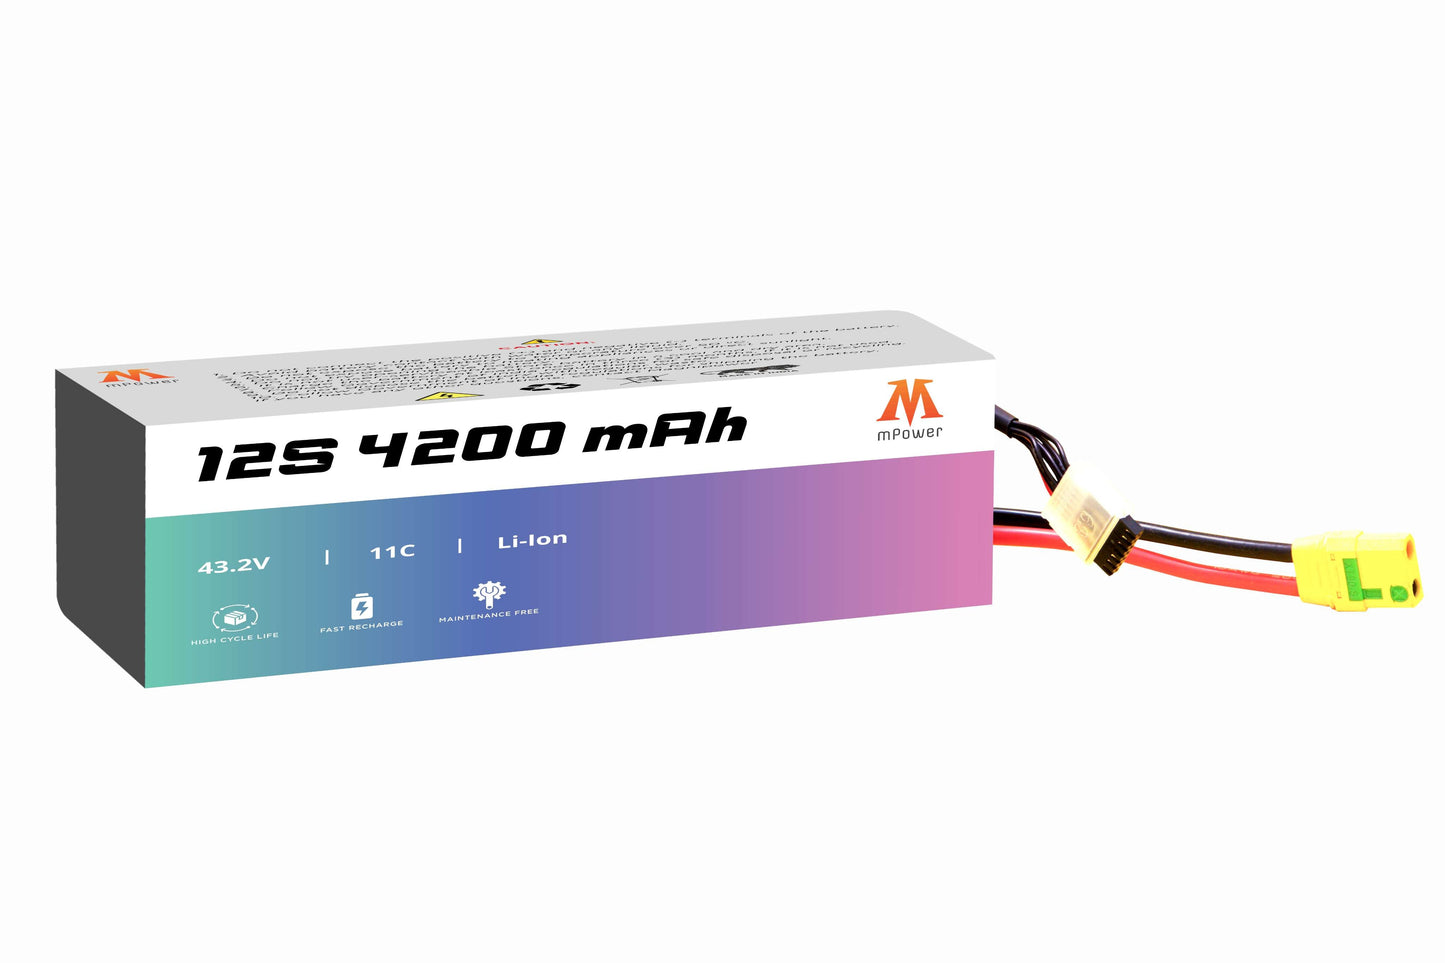 mPower 12S 4200mAh Lithium-Ion Battery for Survey Drones